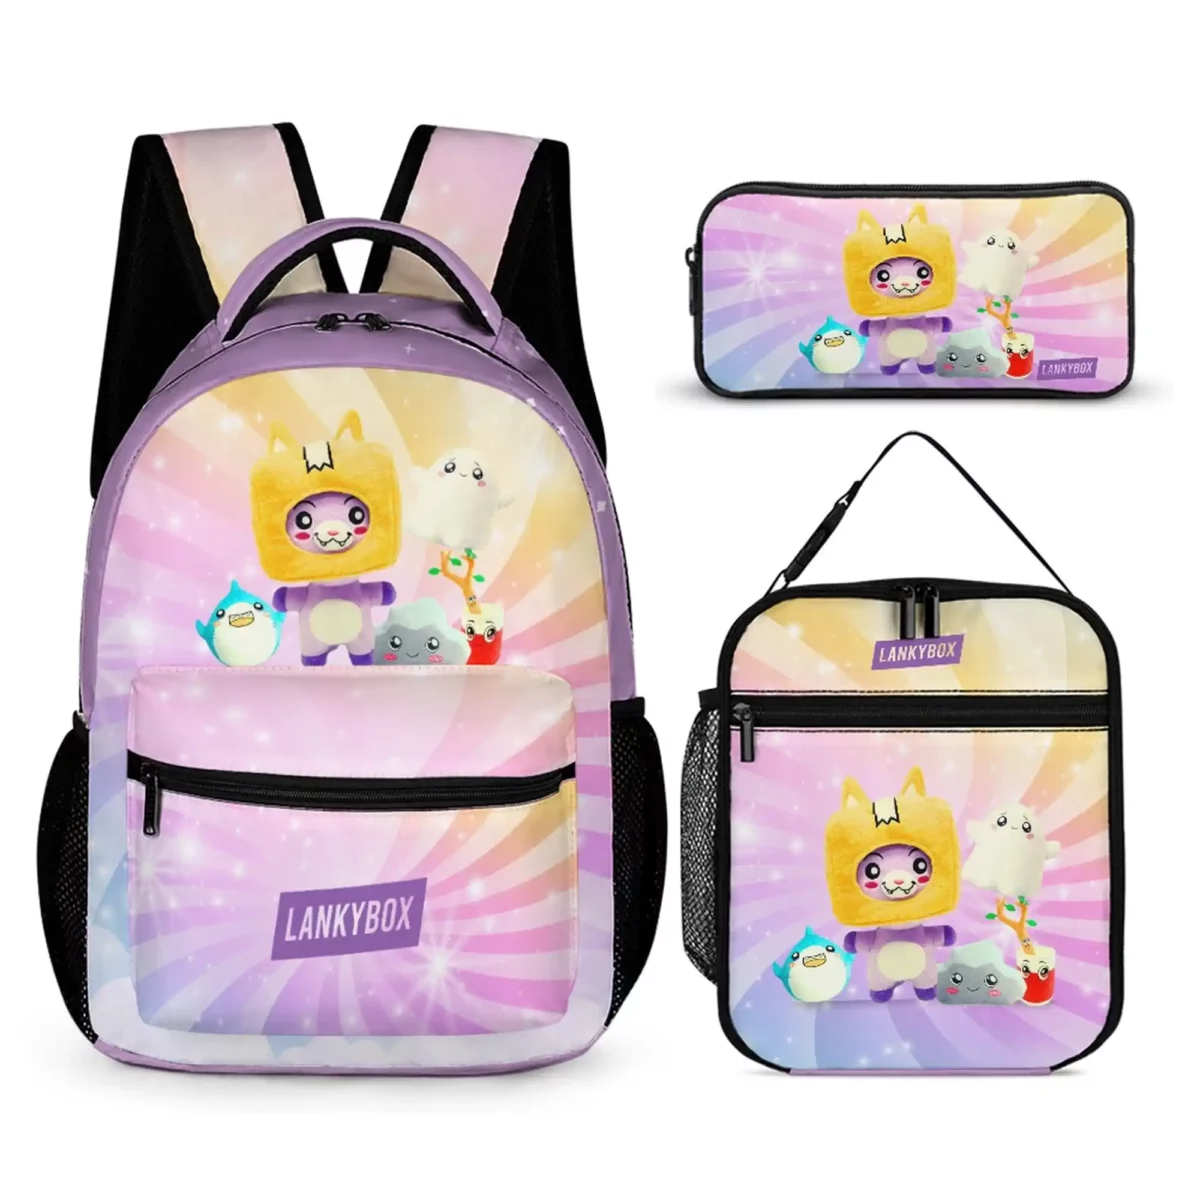 LANKYBOX Three-Piece Set – Book Bag, Lunch Bag, and Pencil Case – Lilac and Yellow Characters Backpack Cool Kiddo 10